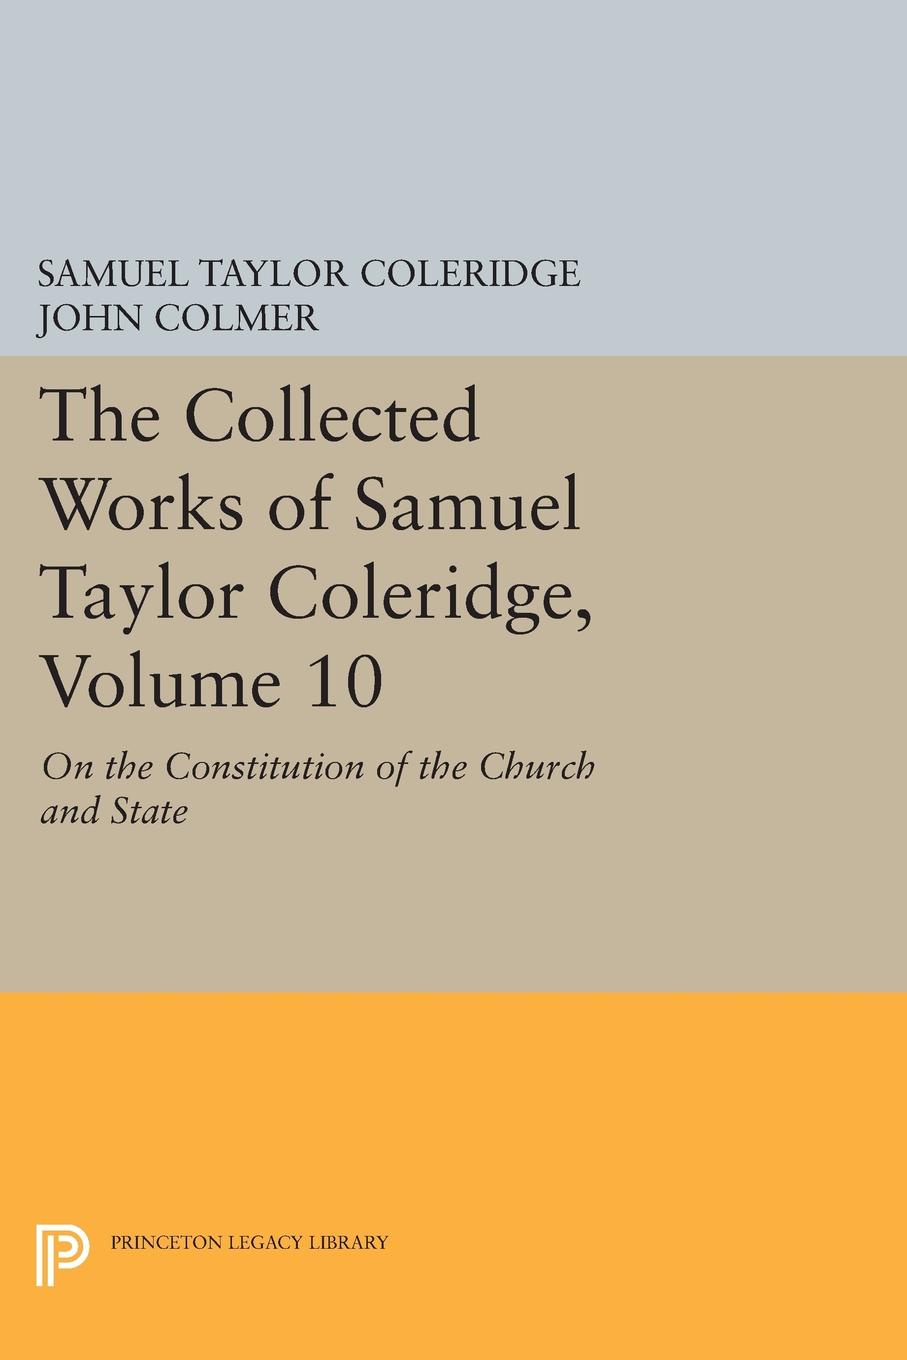 The Collected Works of Samuel Taylor Coleridge, Volume 10. On the Constitution of the Church and State